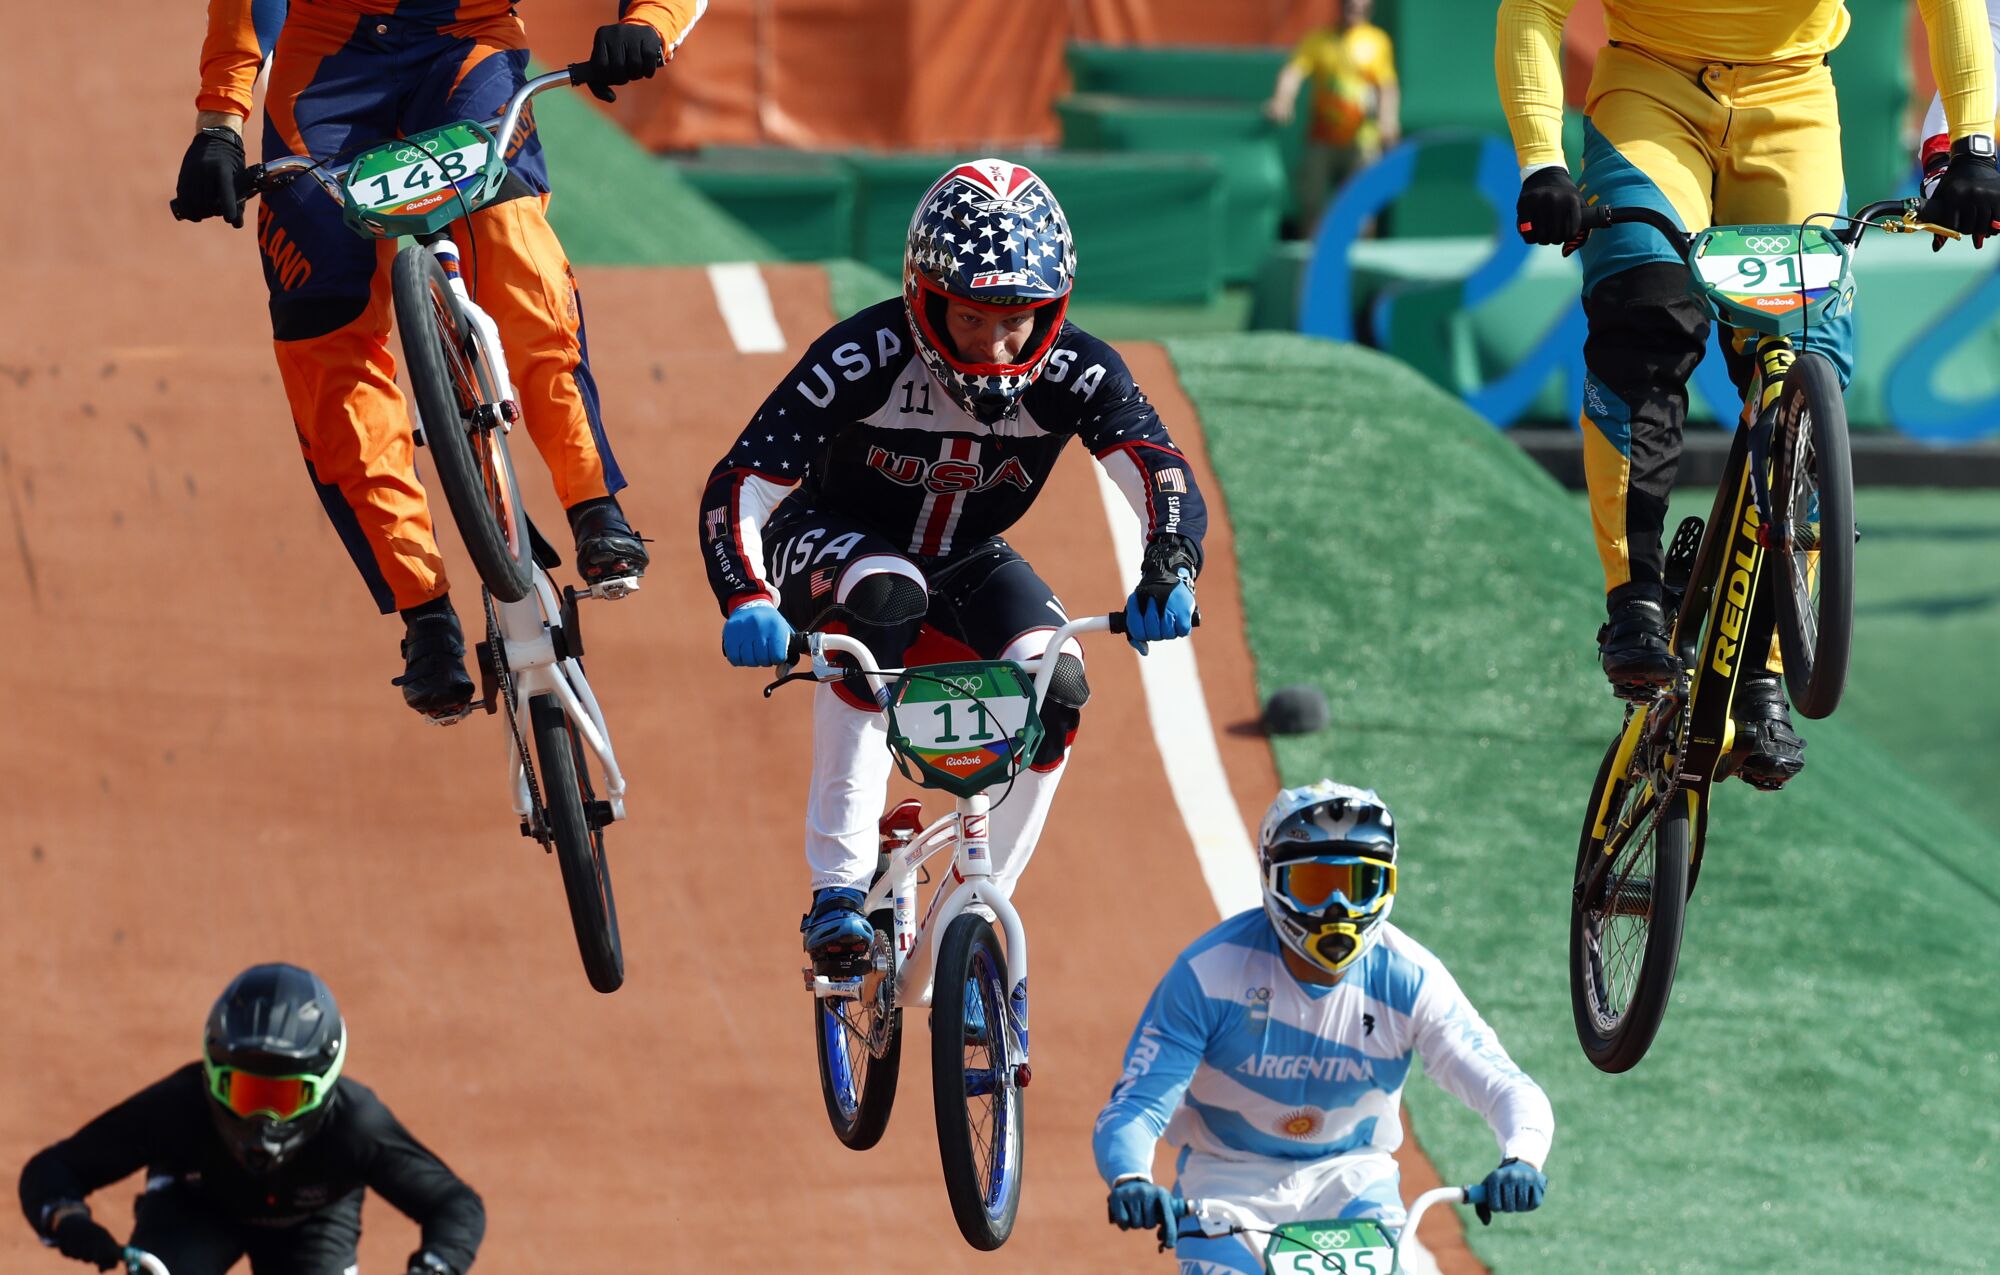 BMX bikers are suspended in midair.